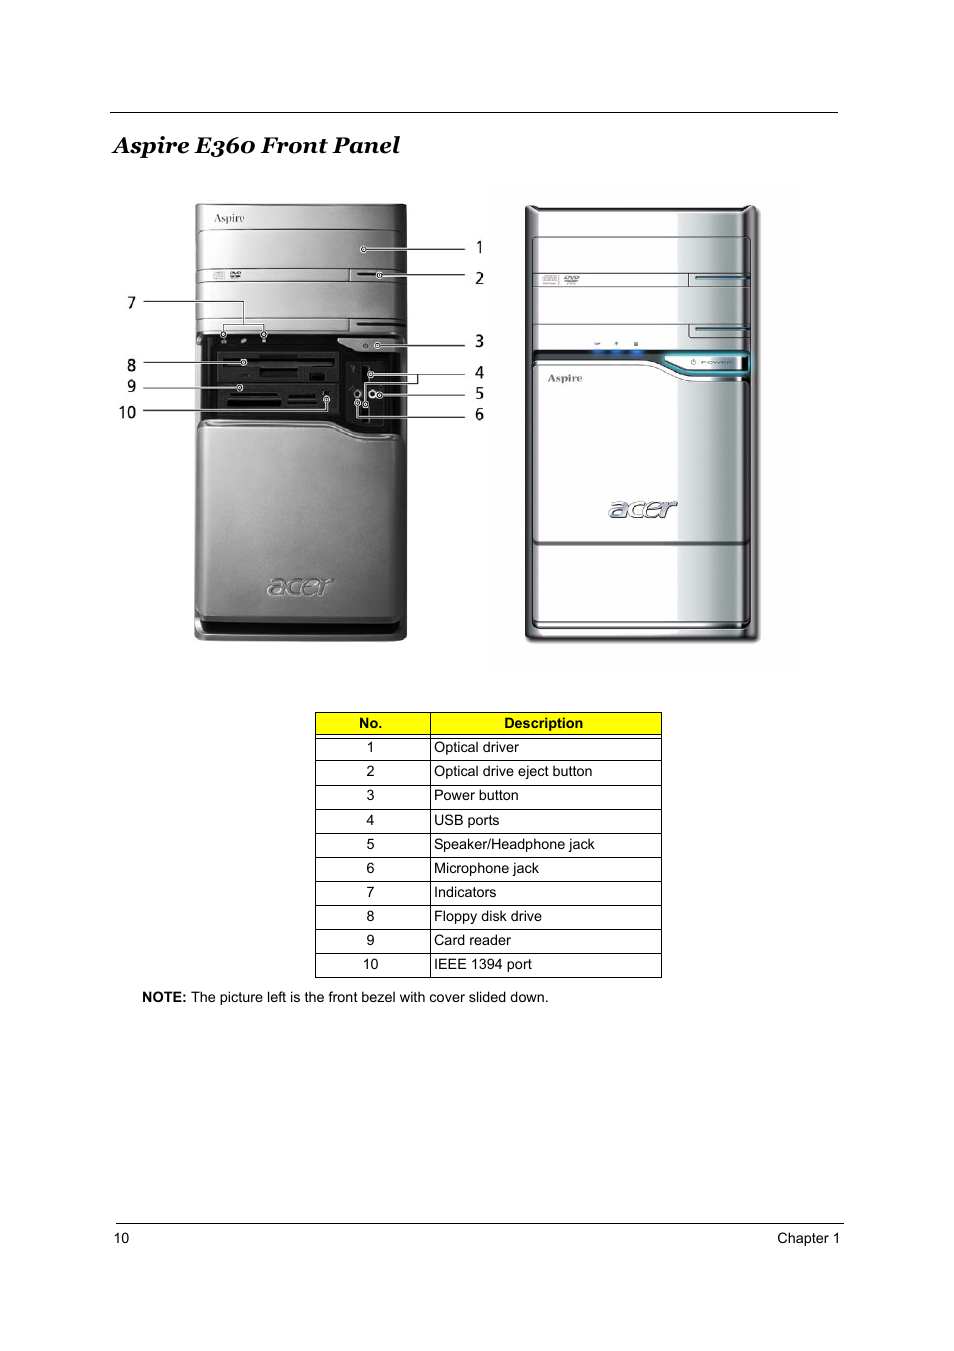 Aspire e360 front panel | Acer Aspire T160 User Manual | Page 19 / 164